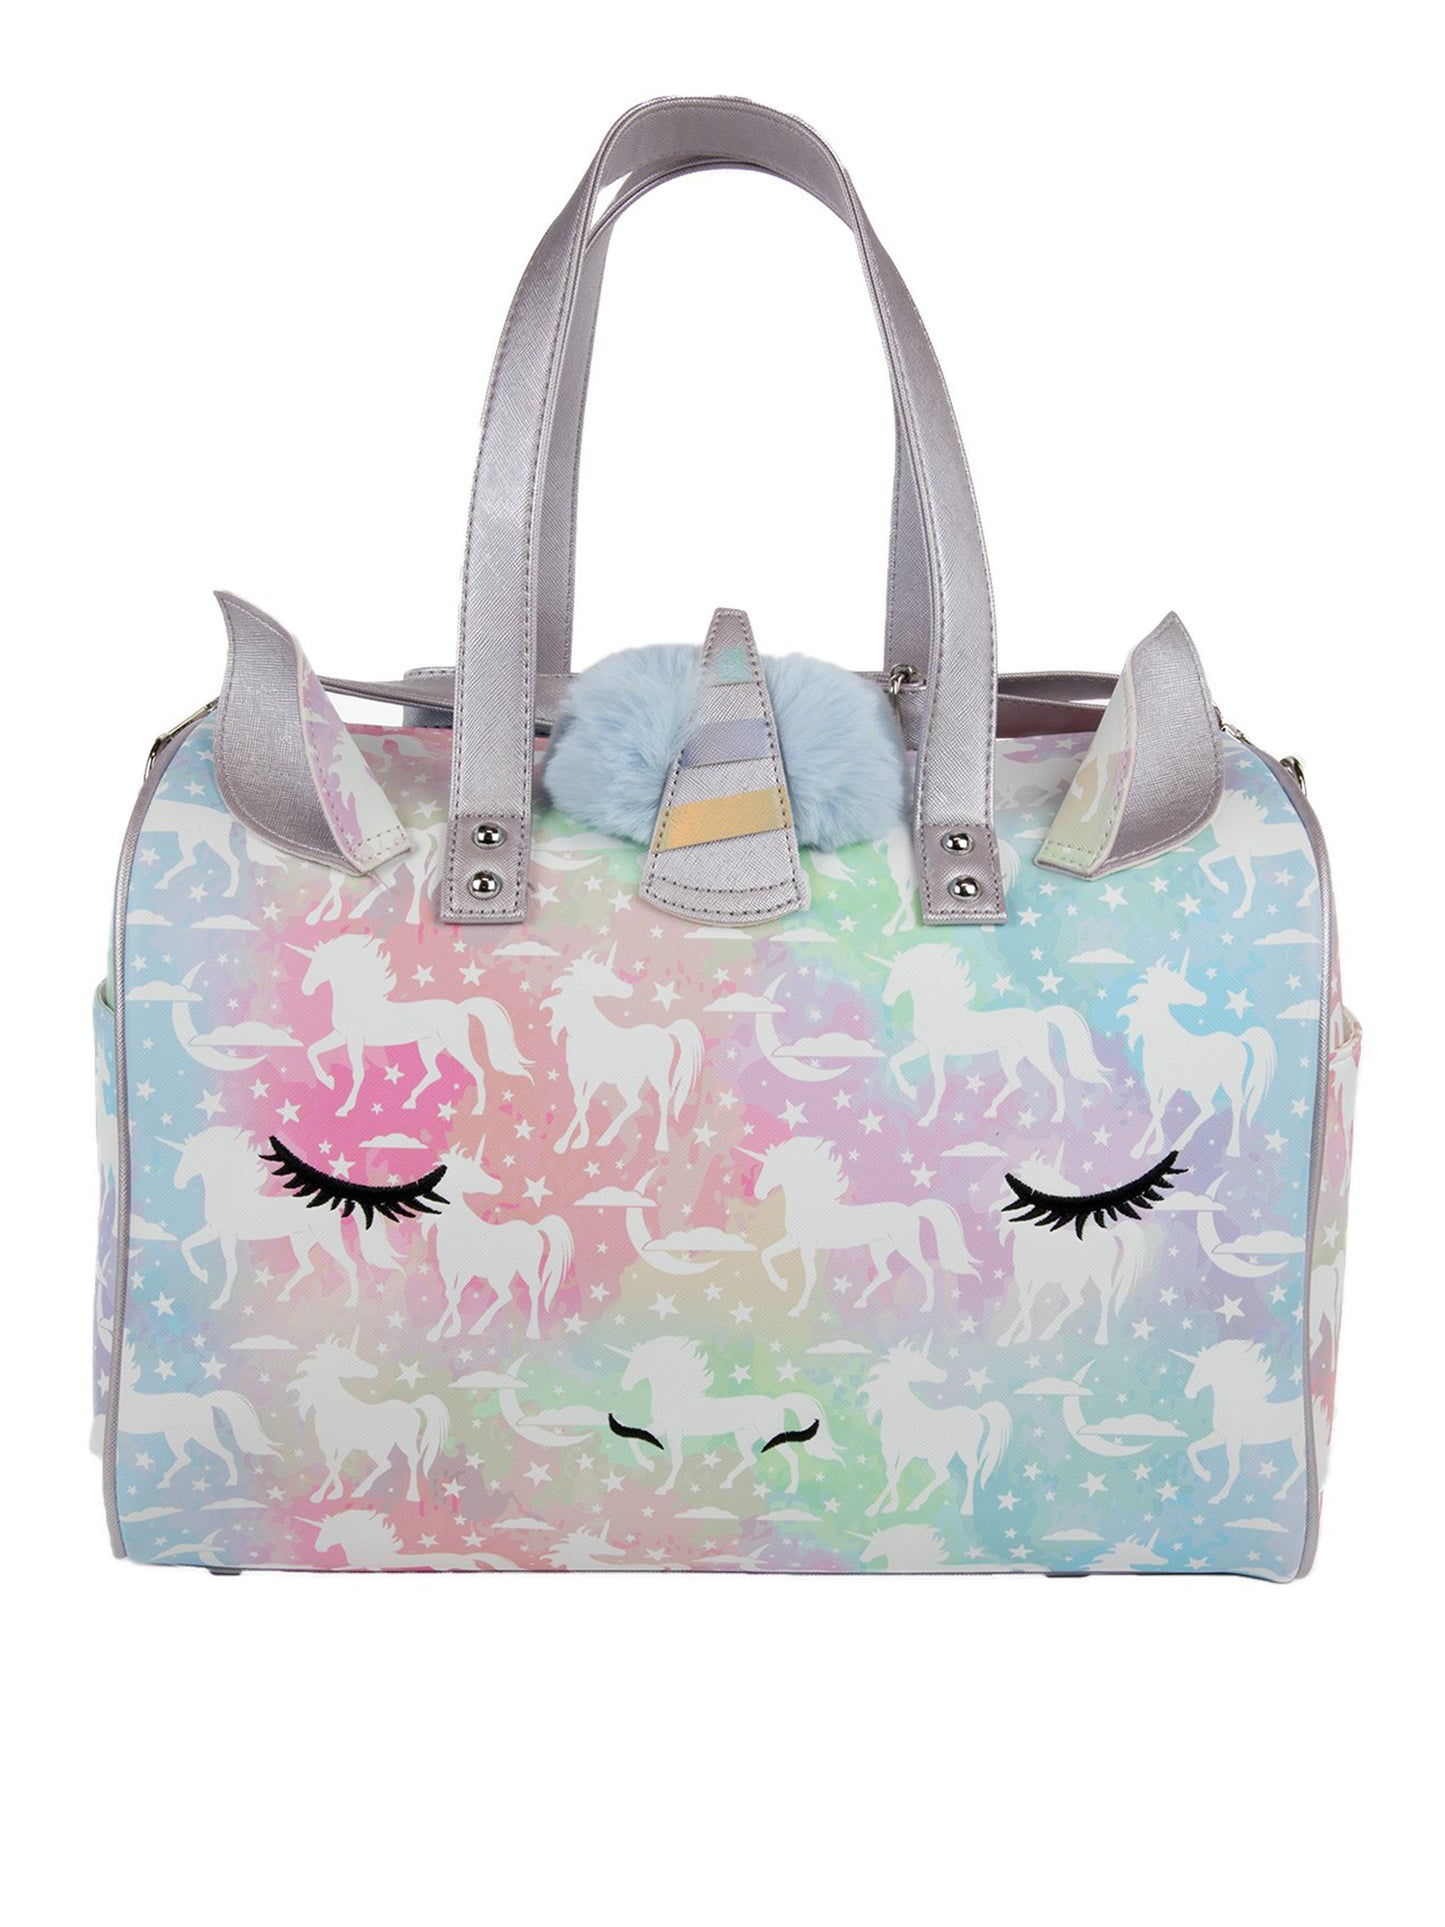 Unicorn Tote Under One Sky Weekender Pink Shiny Bag Excellent Used Condition